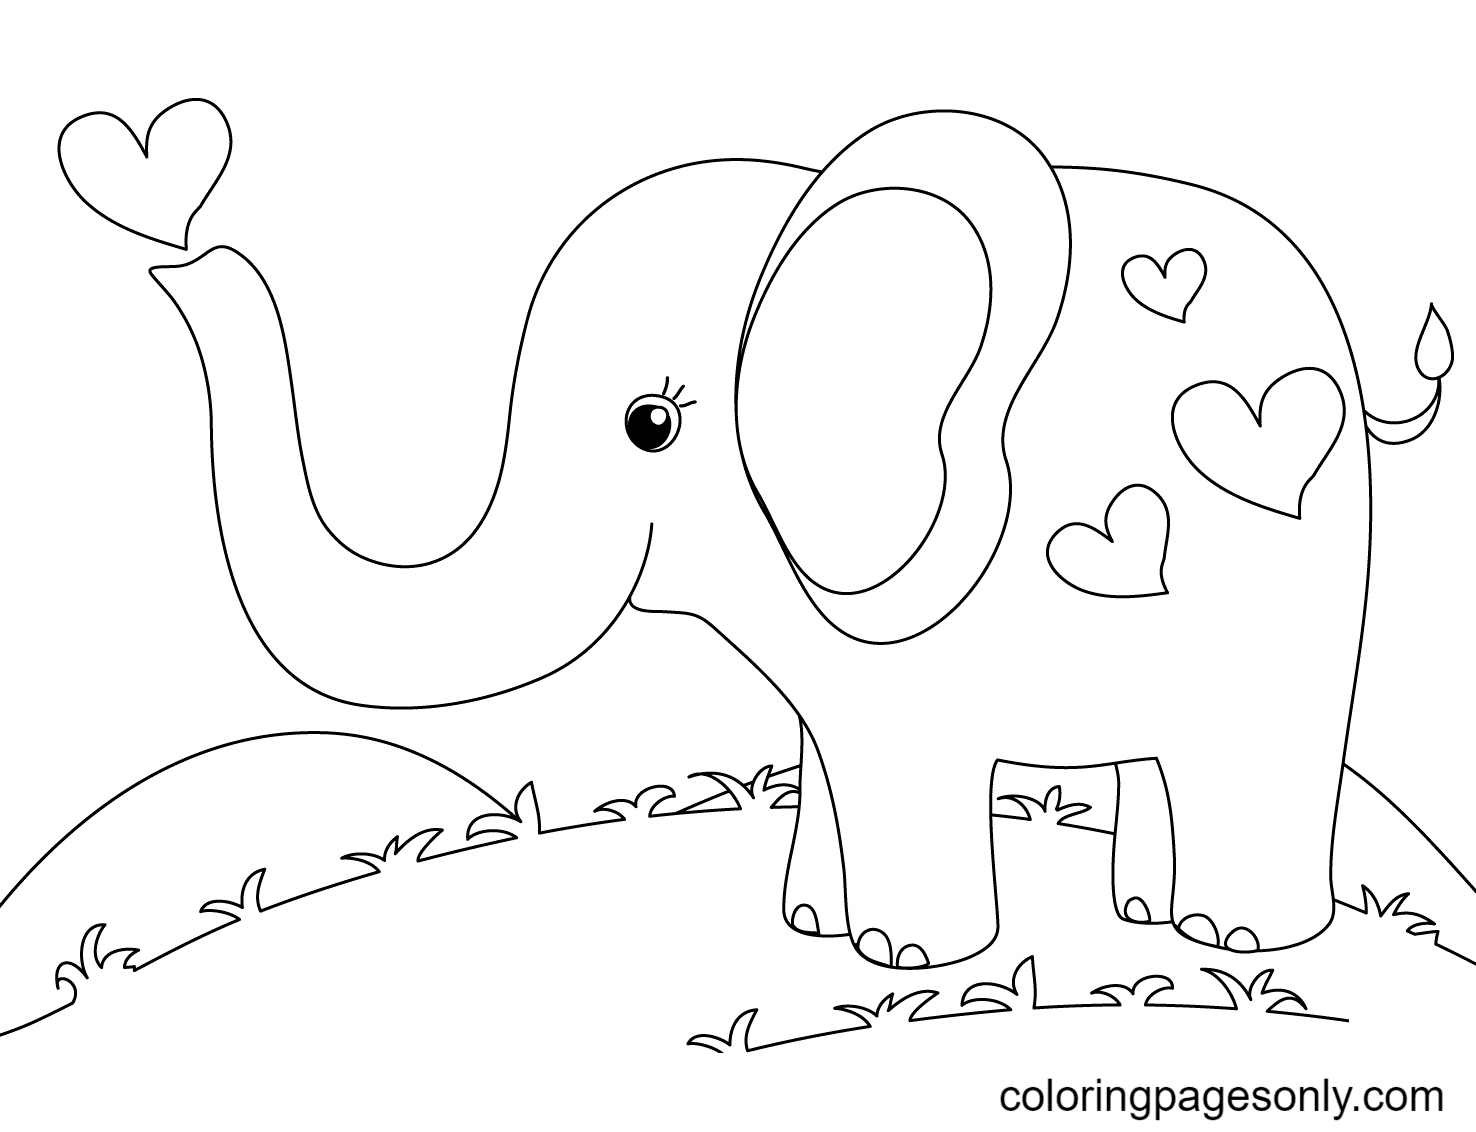 Cute Little Elephant Coloring Pages   Elephant Coloring Pages ...